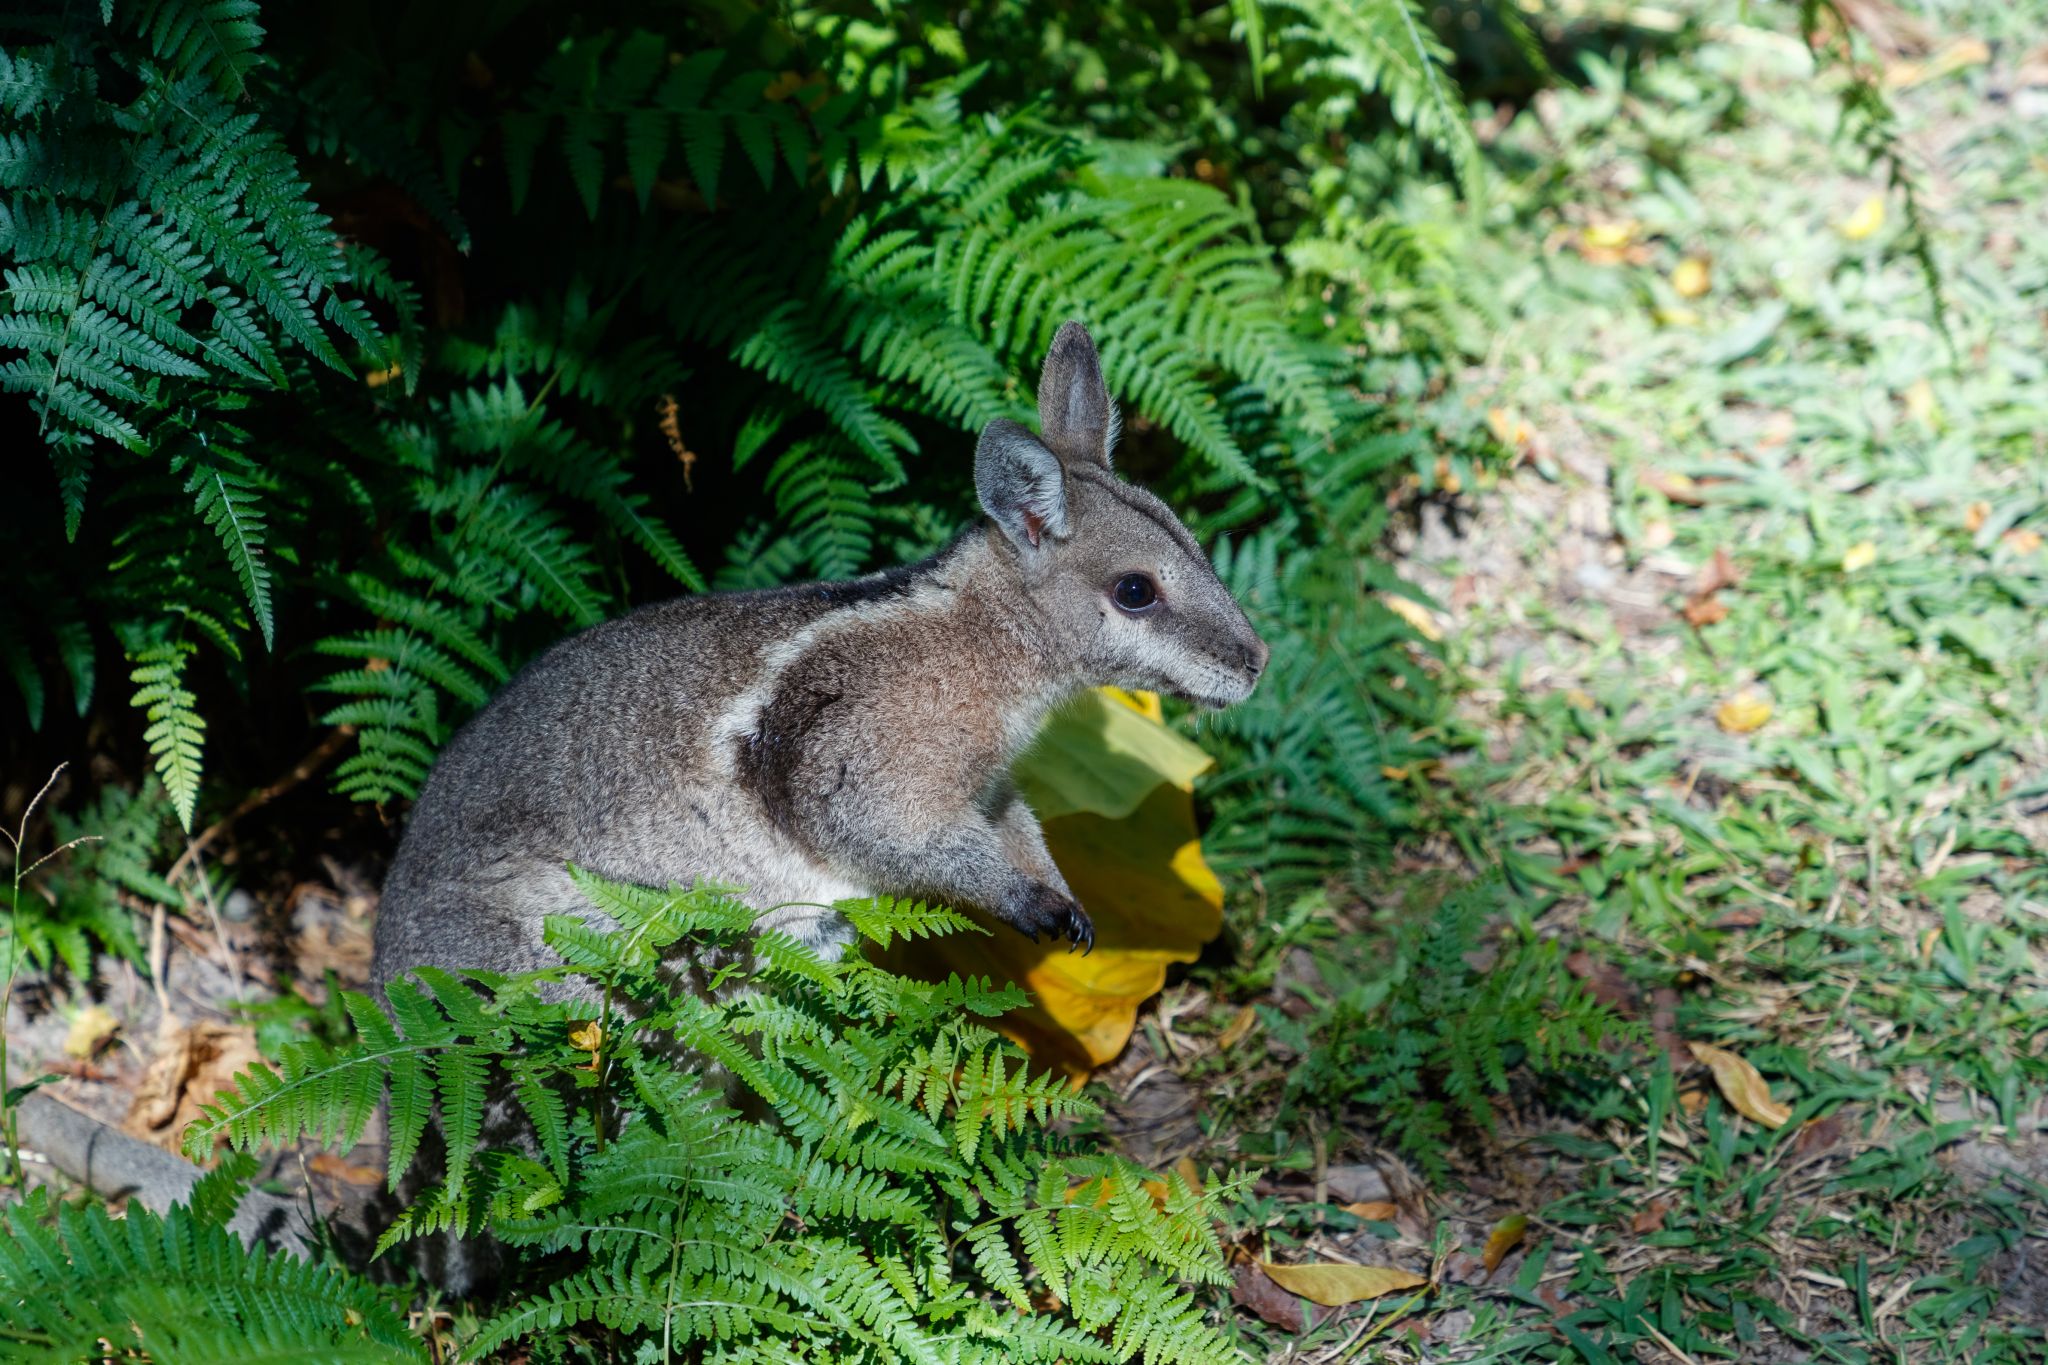 Bridled nailtail wallaby in the bushes.